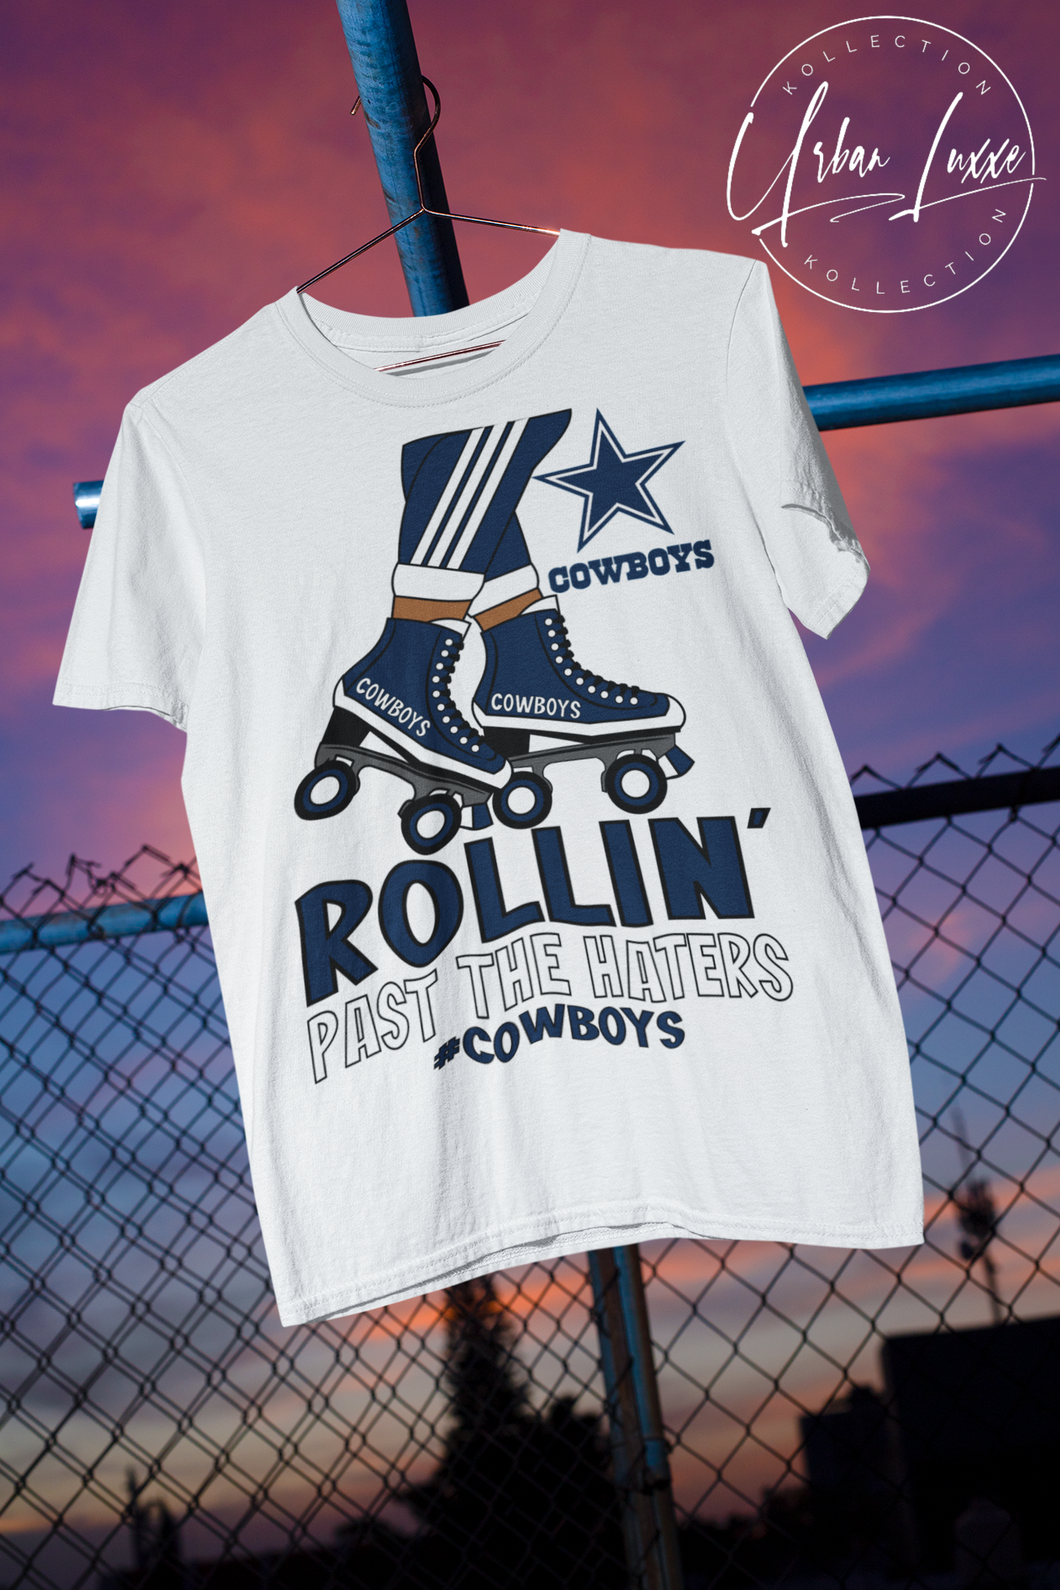 Rollin’ Past The Haters Dallas Cowboys T-shirt